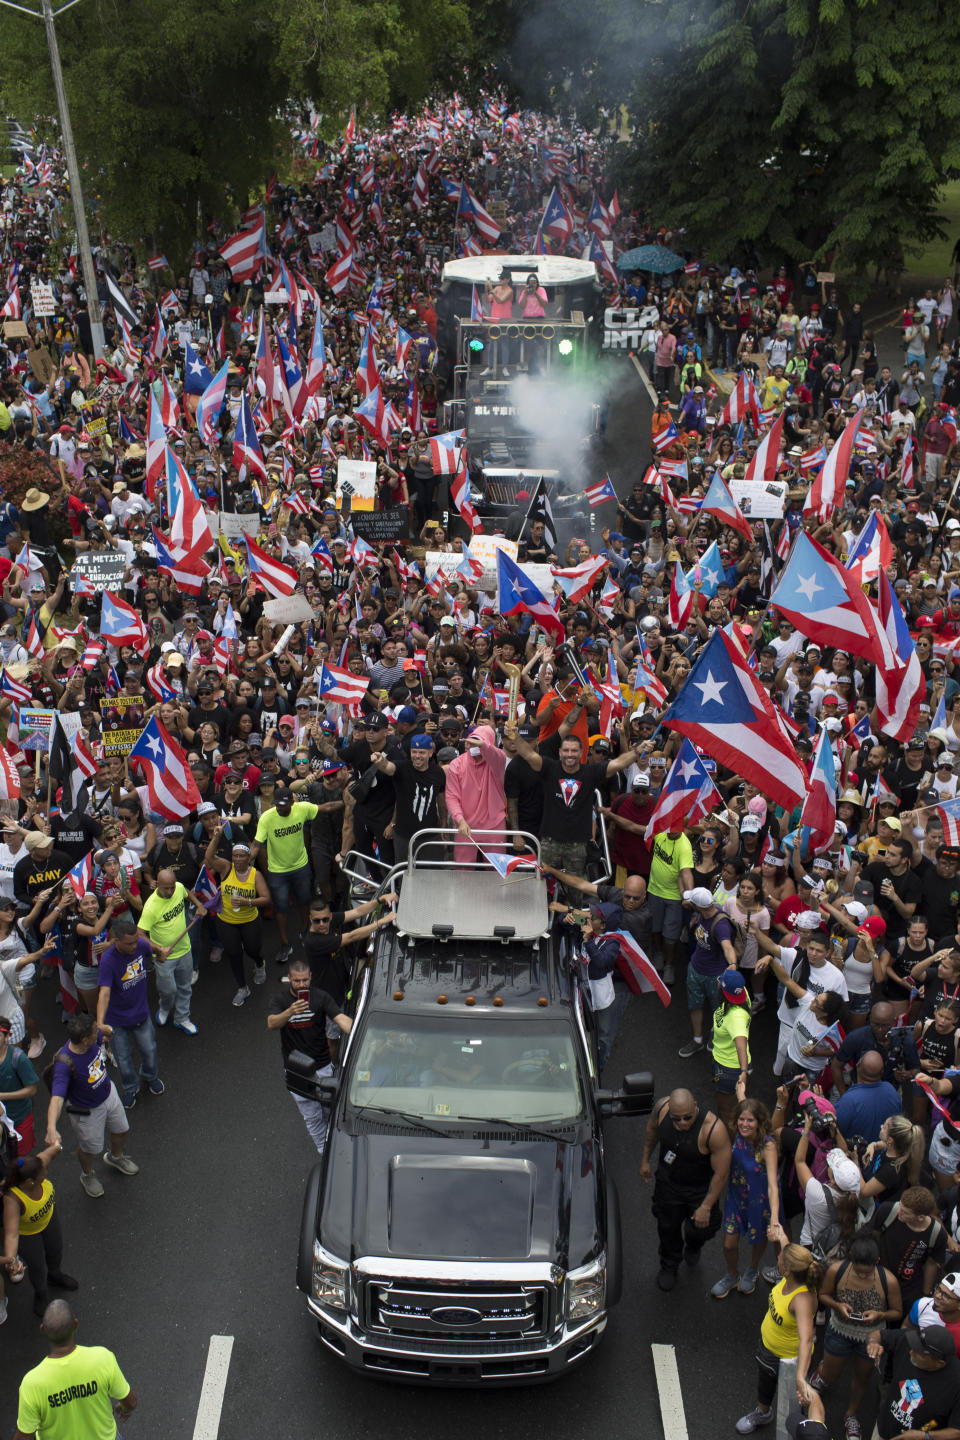 FILE - In this July 25, 2019 file photo, Puerto Rican singer Rene Perez Joglar, also known has Residente, center left in blue cap, and Bad Bunny, center dressed in pink, ride a top a vehicle in a march to celebrate the resignation of Gov. Ricardo Rossello, in San Juan, Puerto Rico. Both celebrities joined the protests that forced Rossello to announce hi resignation from office. (AP Photo/Dennis M. Rivera Pichardo, File)